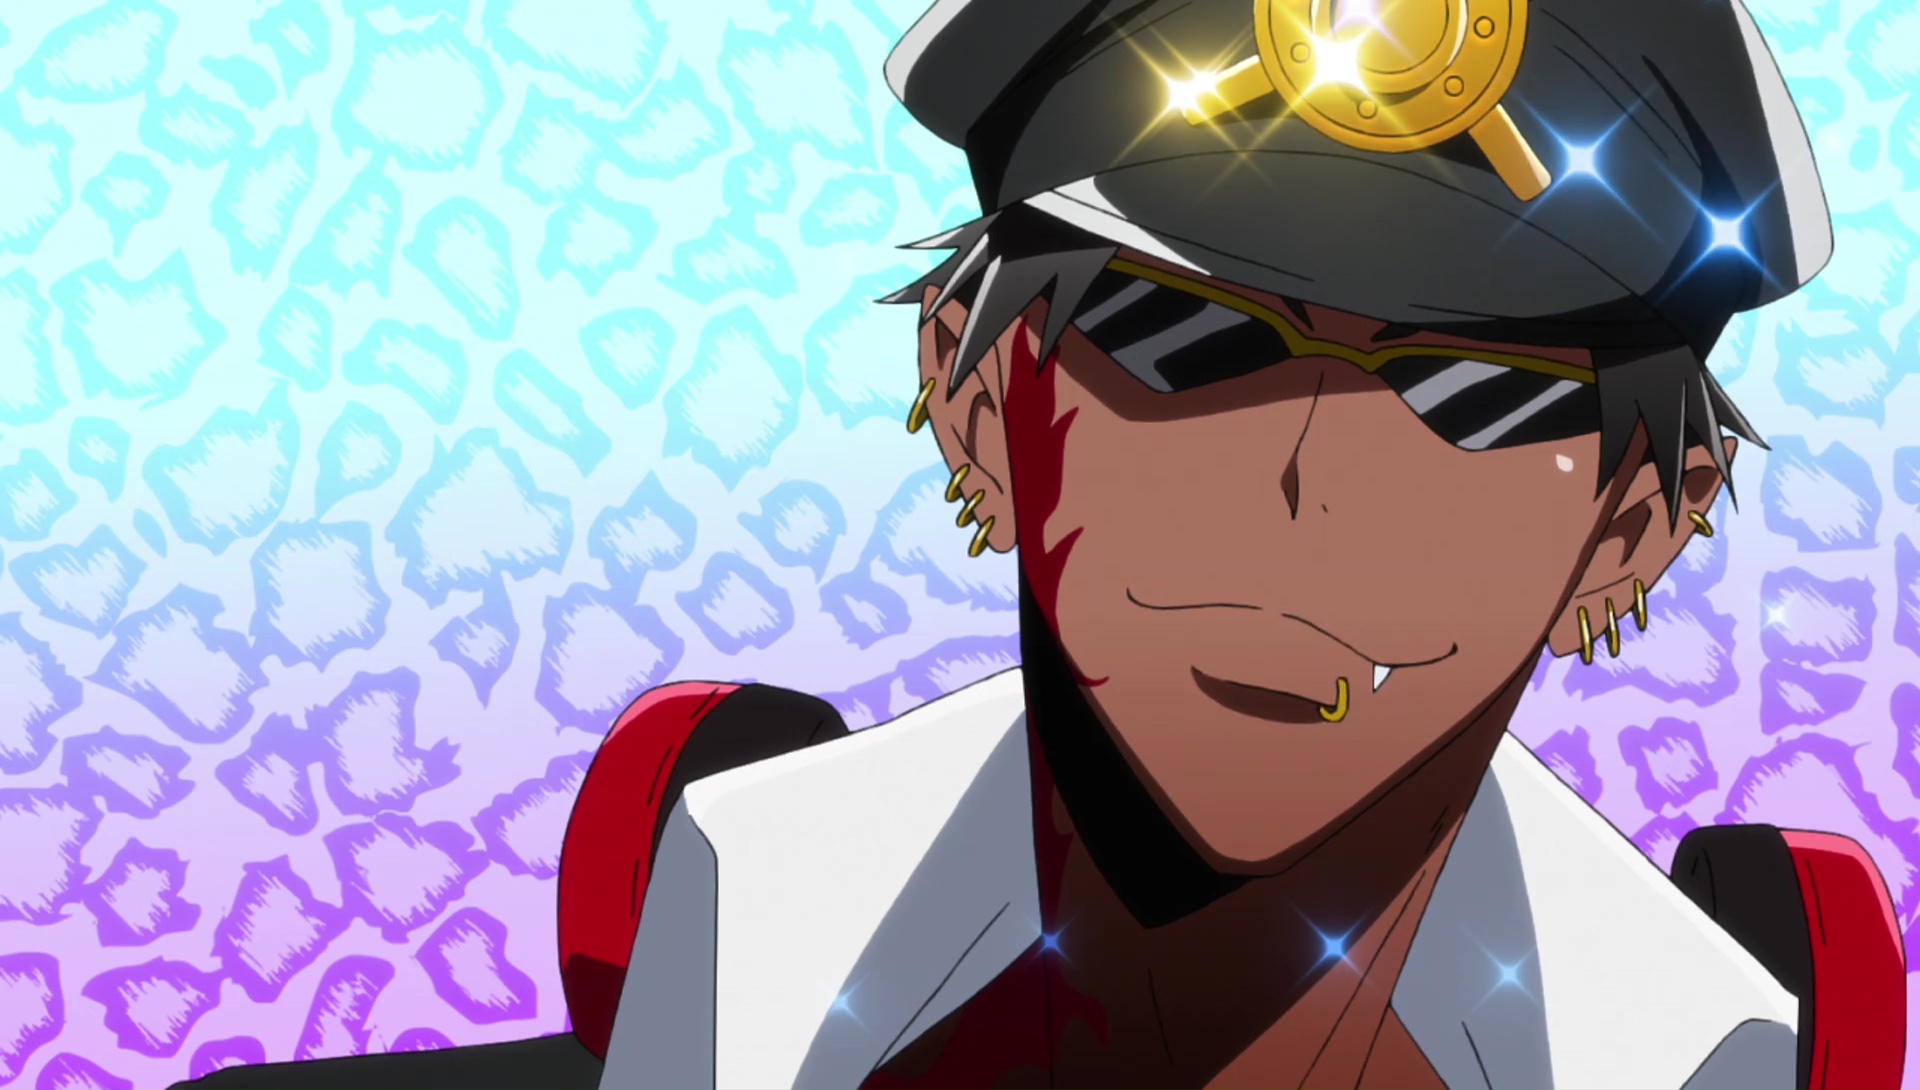 Characters appearing in Nanbaka Anime | Anime-Planet